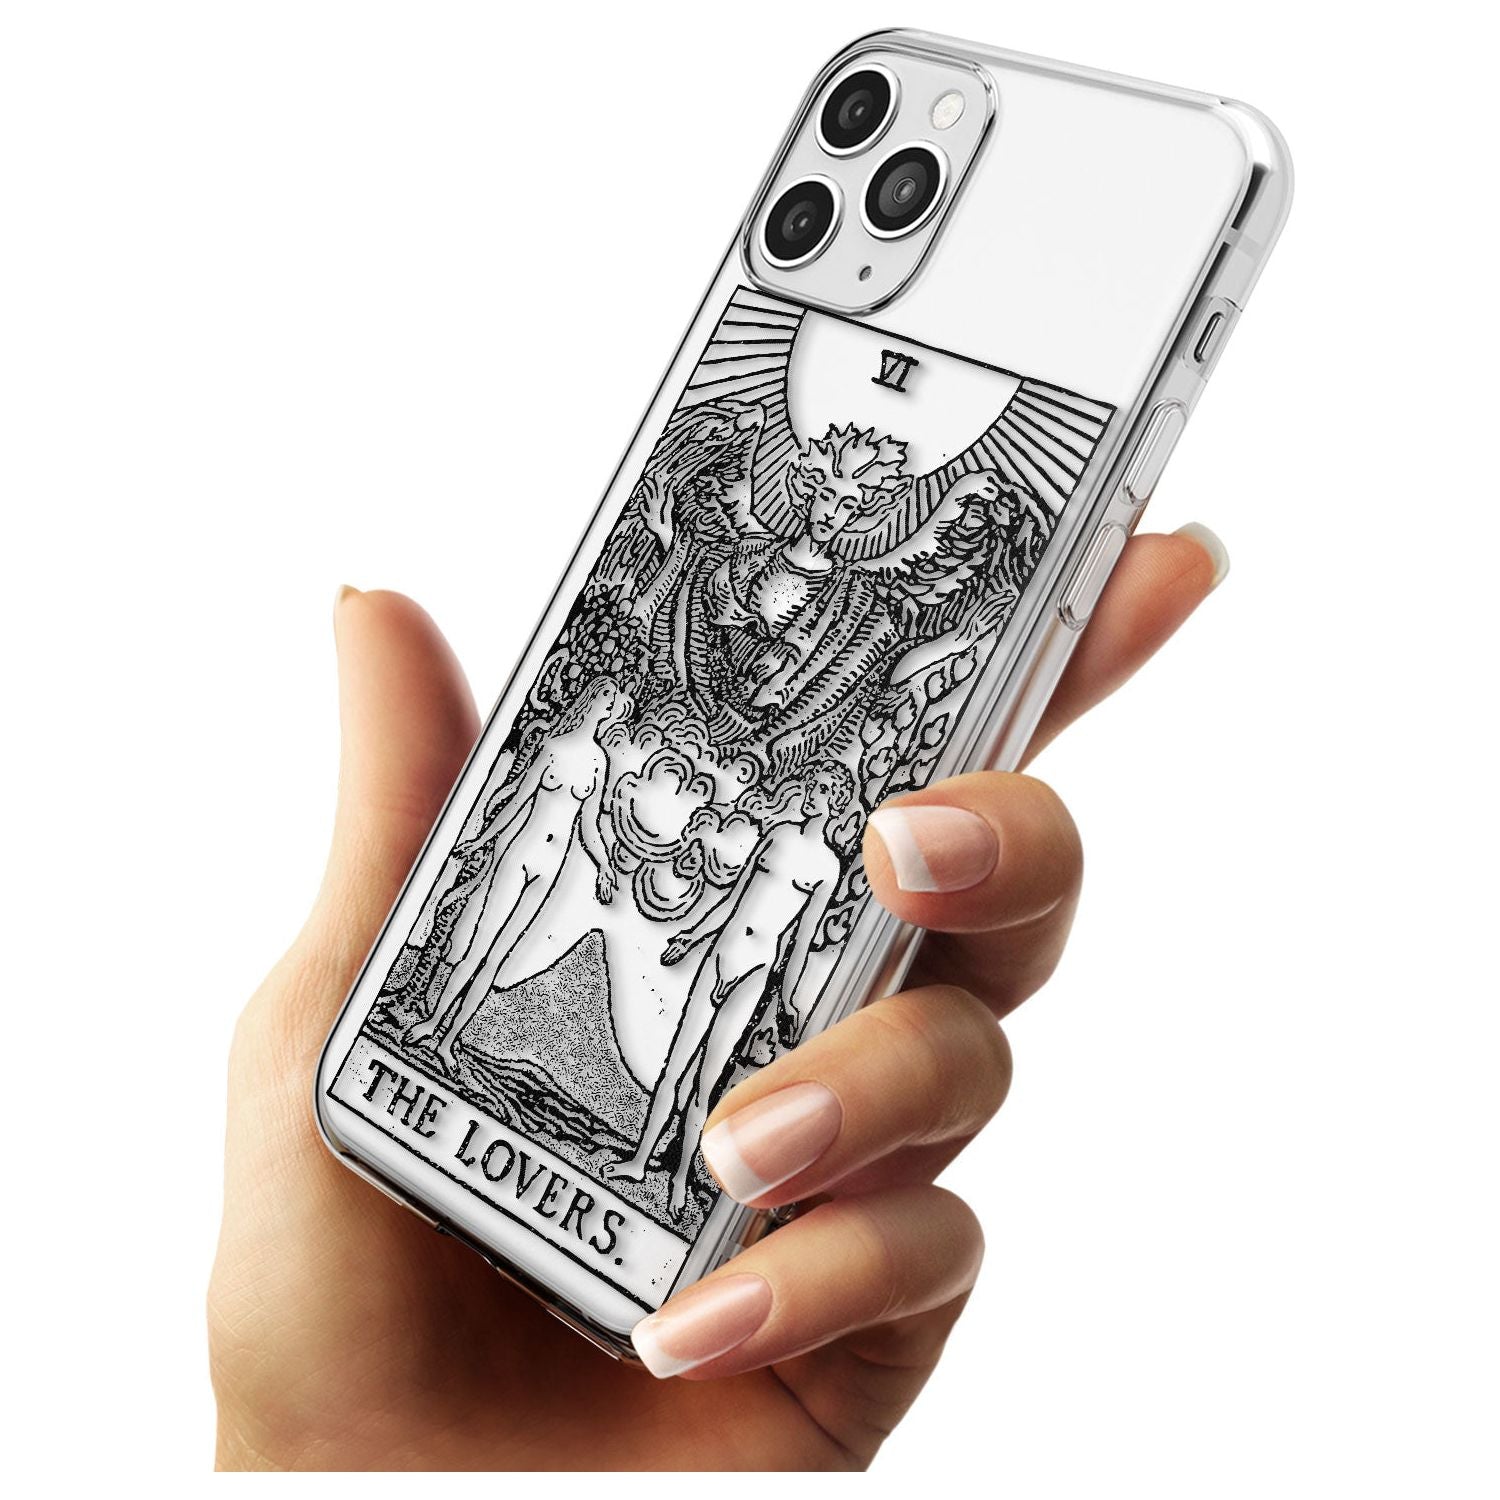 The Lovers Tarot Card - Transparent Black Impact Phone Case for iPhone 11 Pro Max